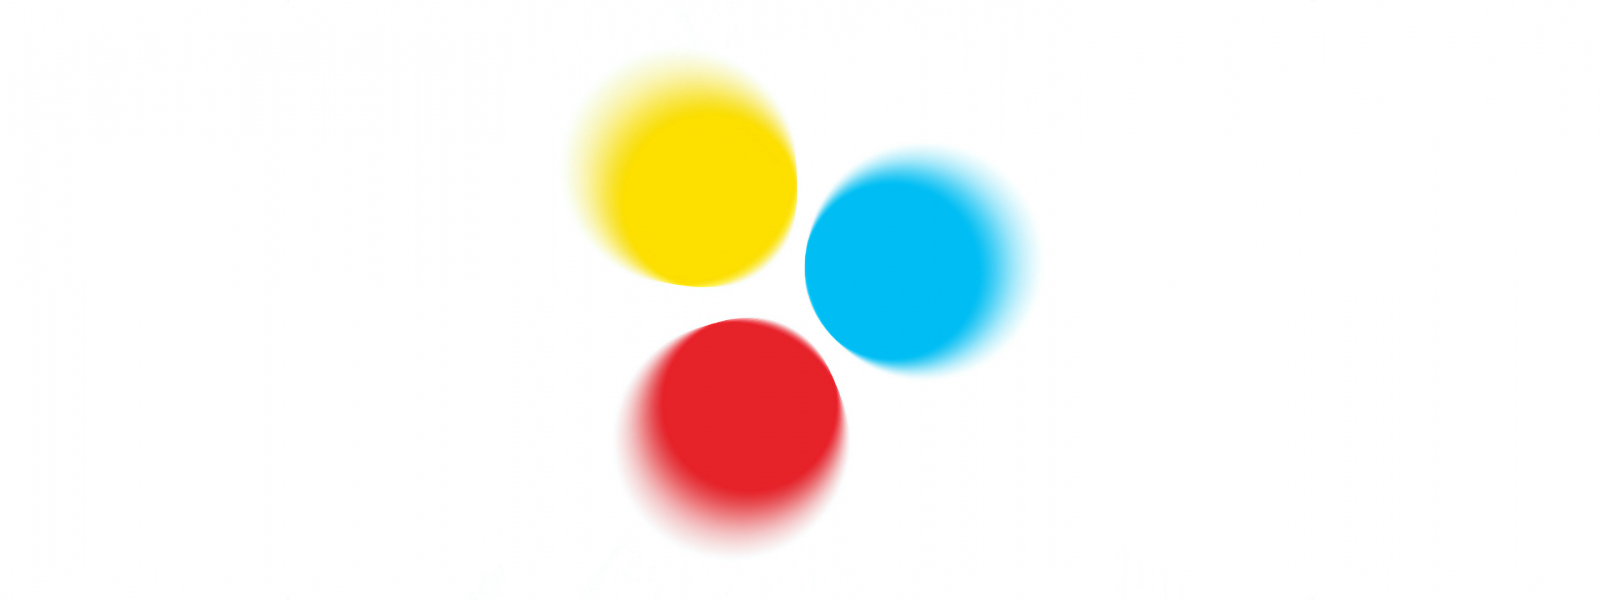 Logo of The Buddhist Centre Online with three colored discs in dynamic motion, yellow, red and blue, representing the Three Jewels of Buddhism - the Buddha, the teaching of the Dharma and the community that practices it together (the Sangha) 